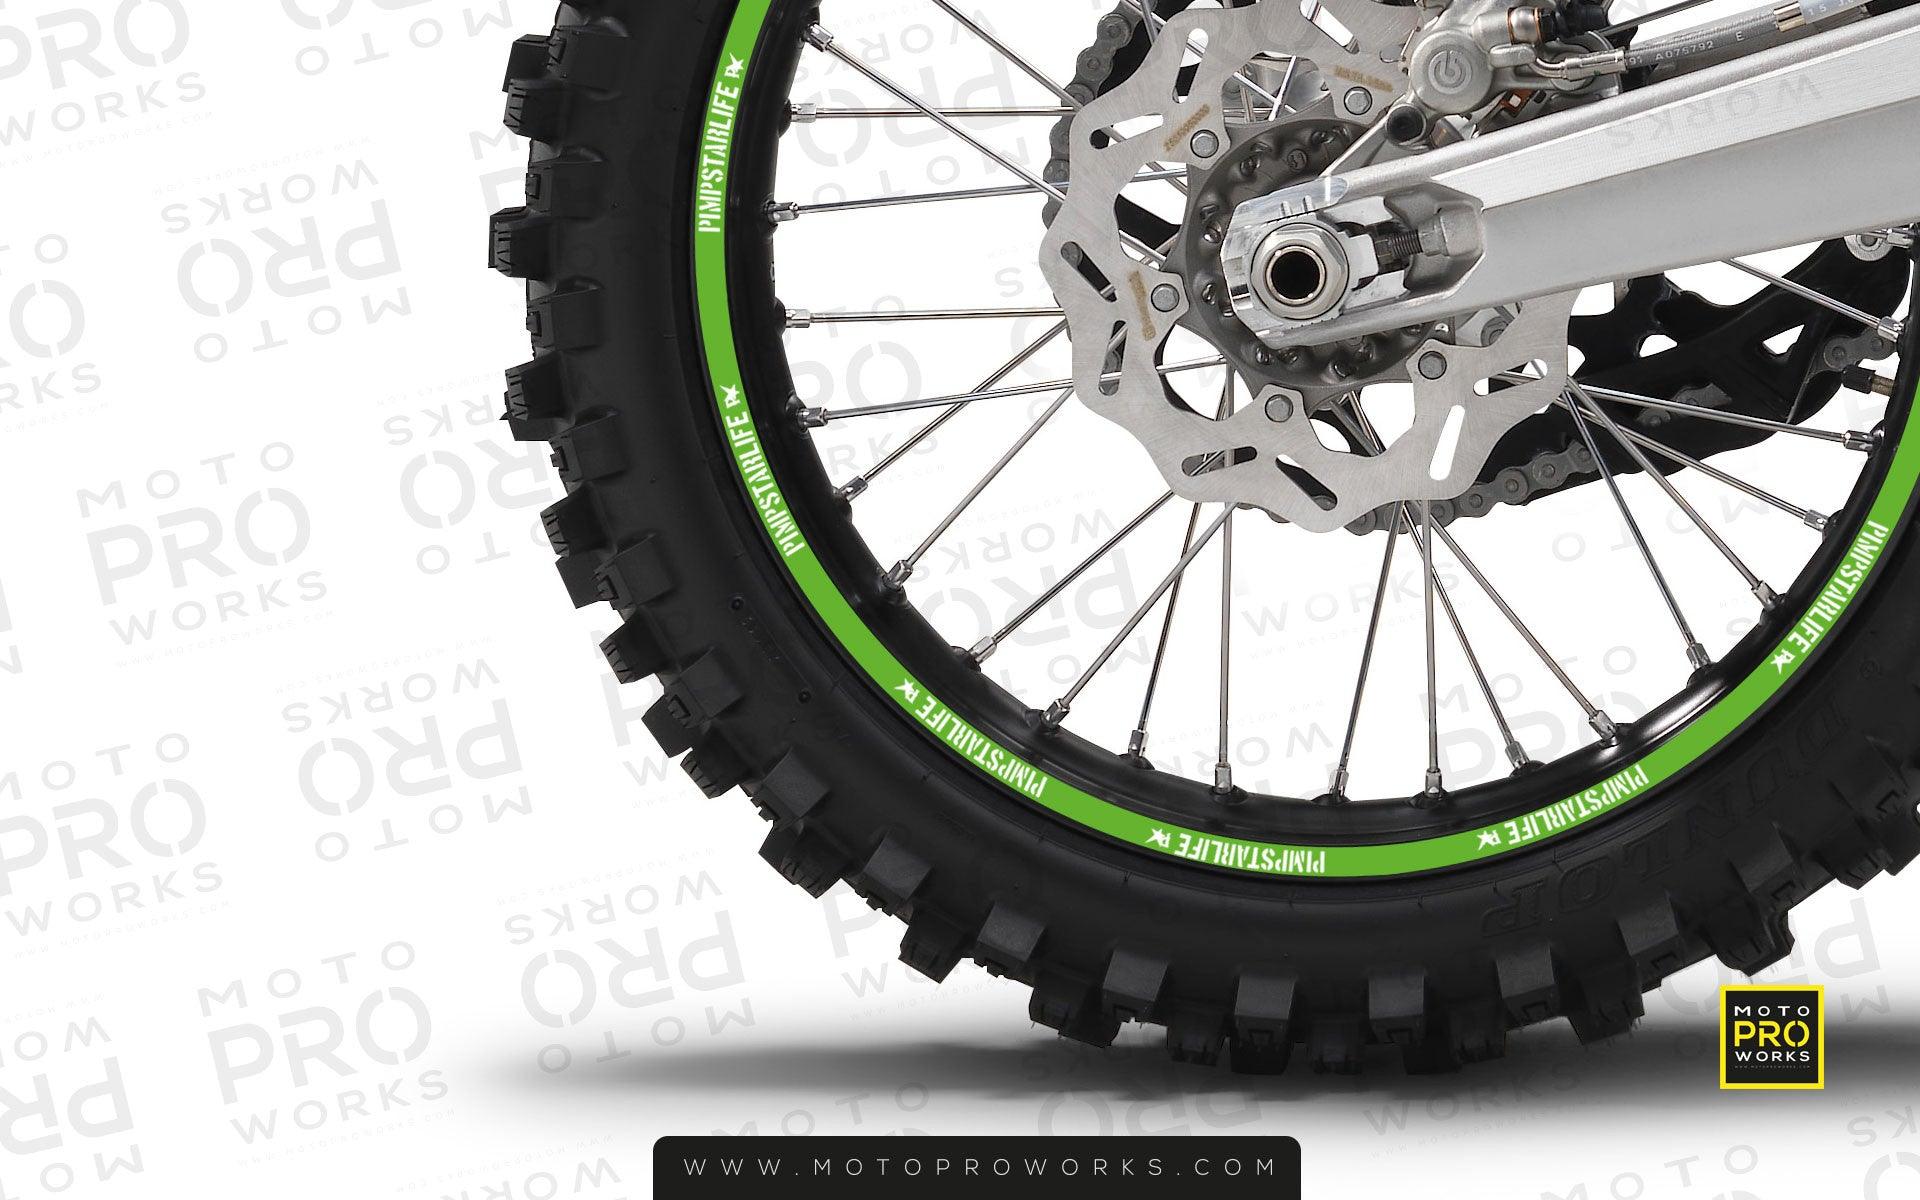 Rim Stripes - "SOLID" Pimpstar (green) - MotoProWorks | Decals and Bike Graphic kit